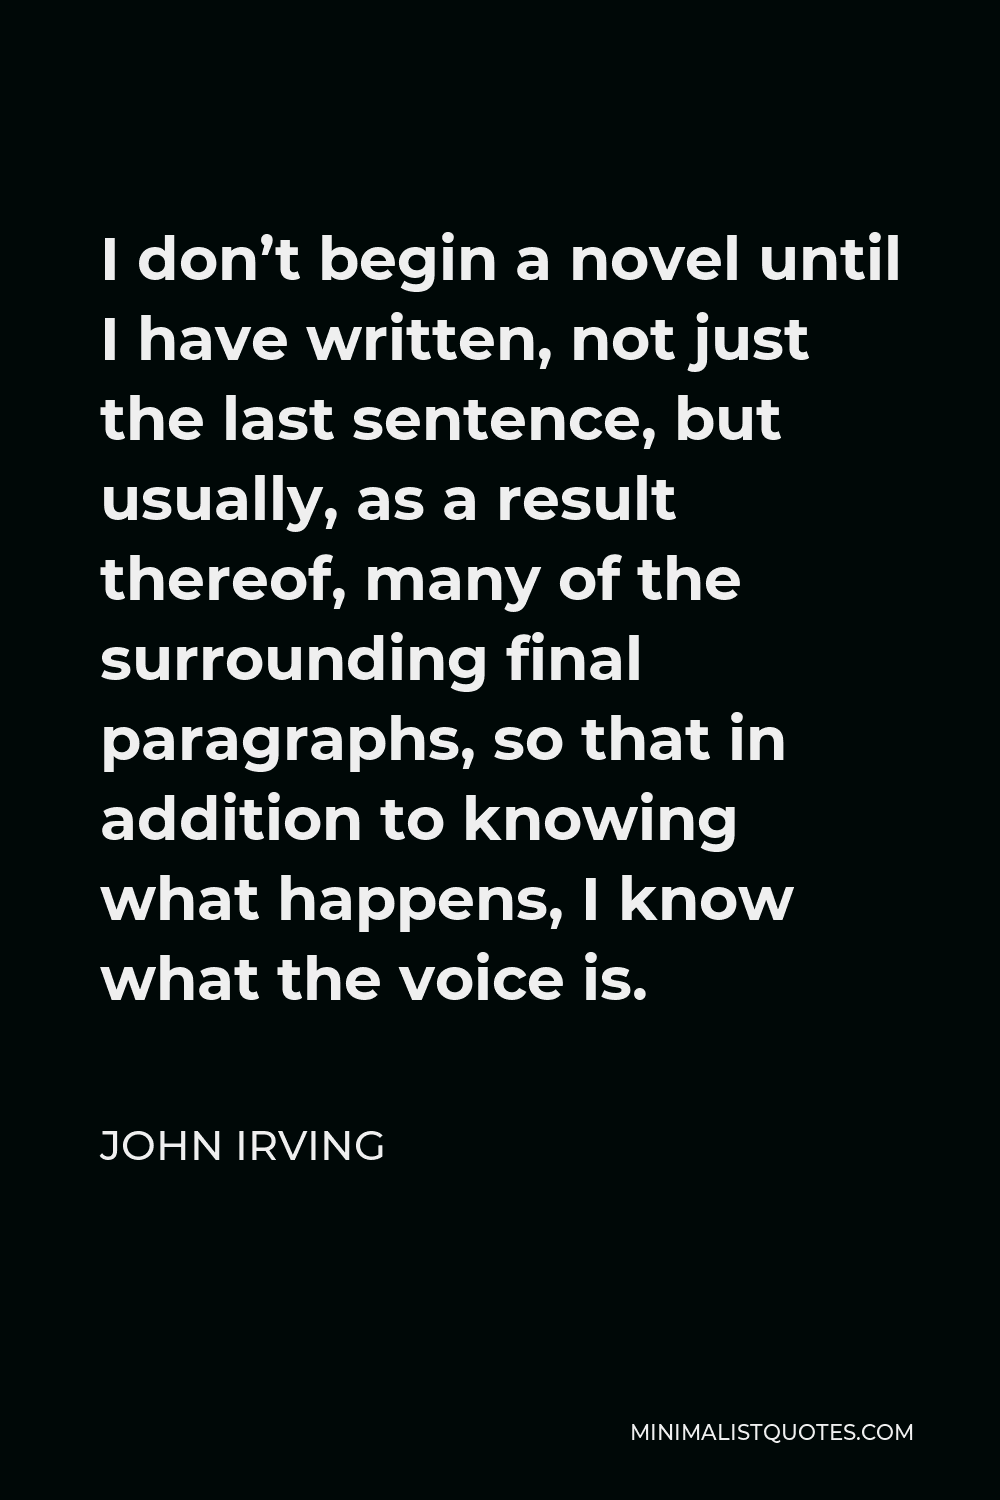 John Irving Quote - I don’t begin a novel until I have written, not just the last sentence, but usually, as a result thereof, many of the surrounding final paragraphs, so that in addition to knowing what happens, I know what the voice is.